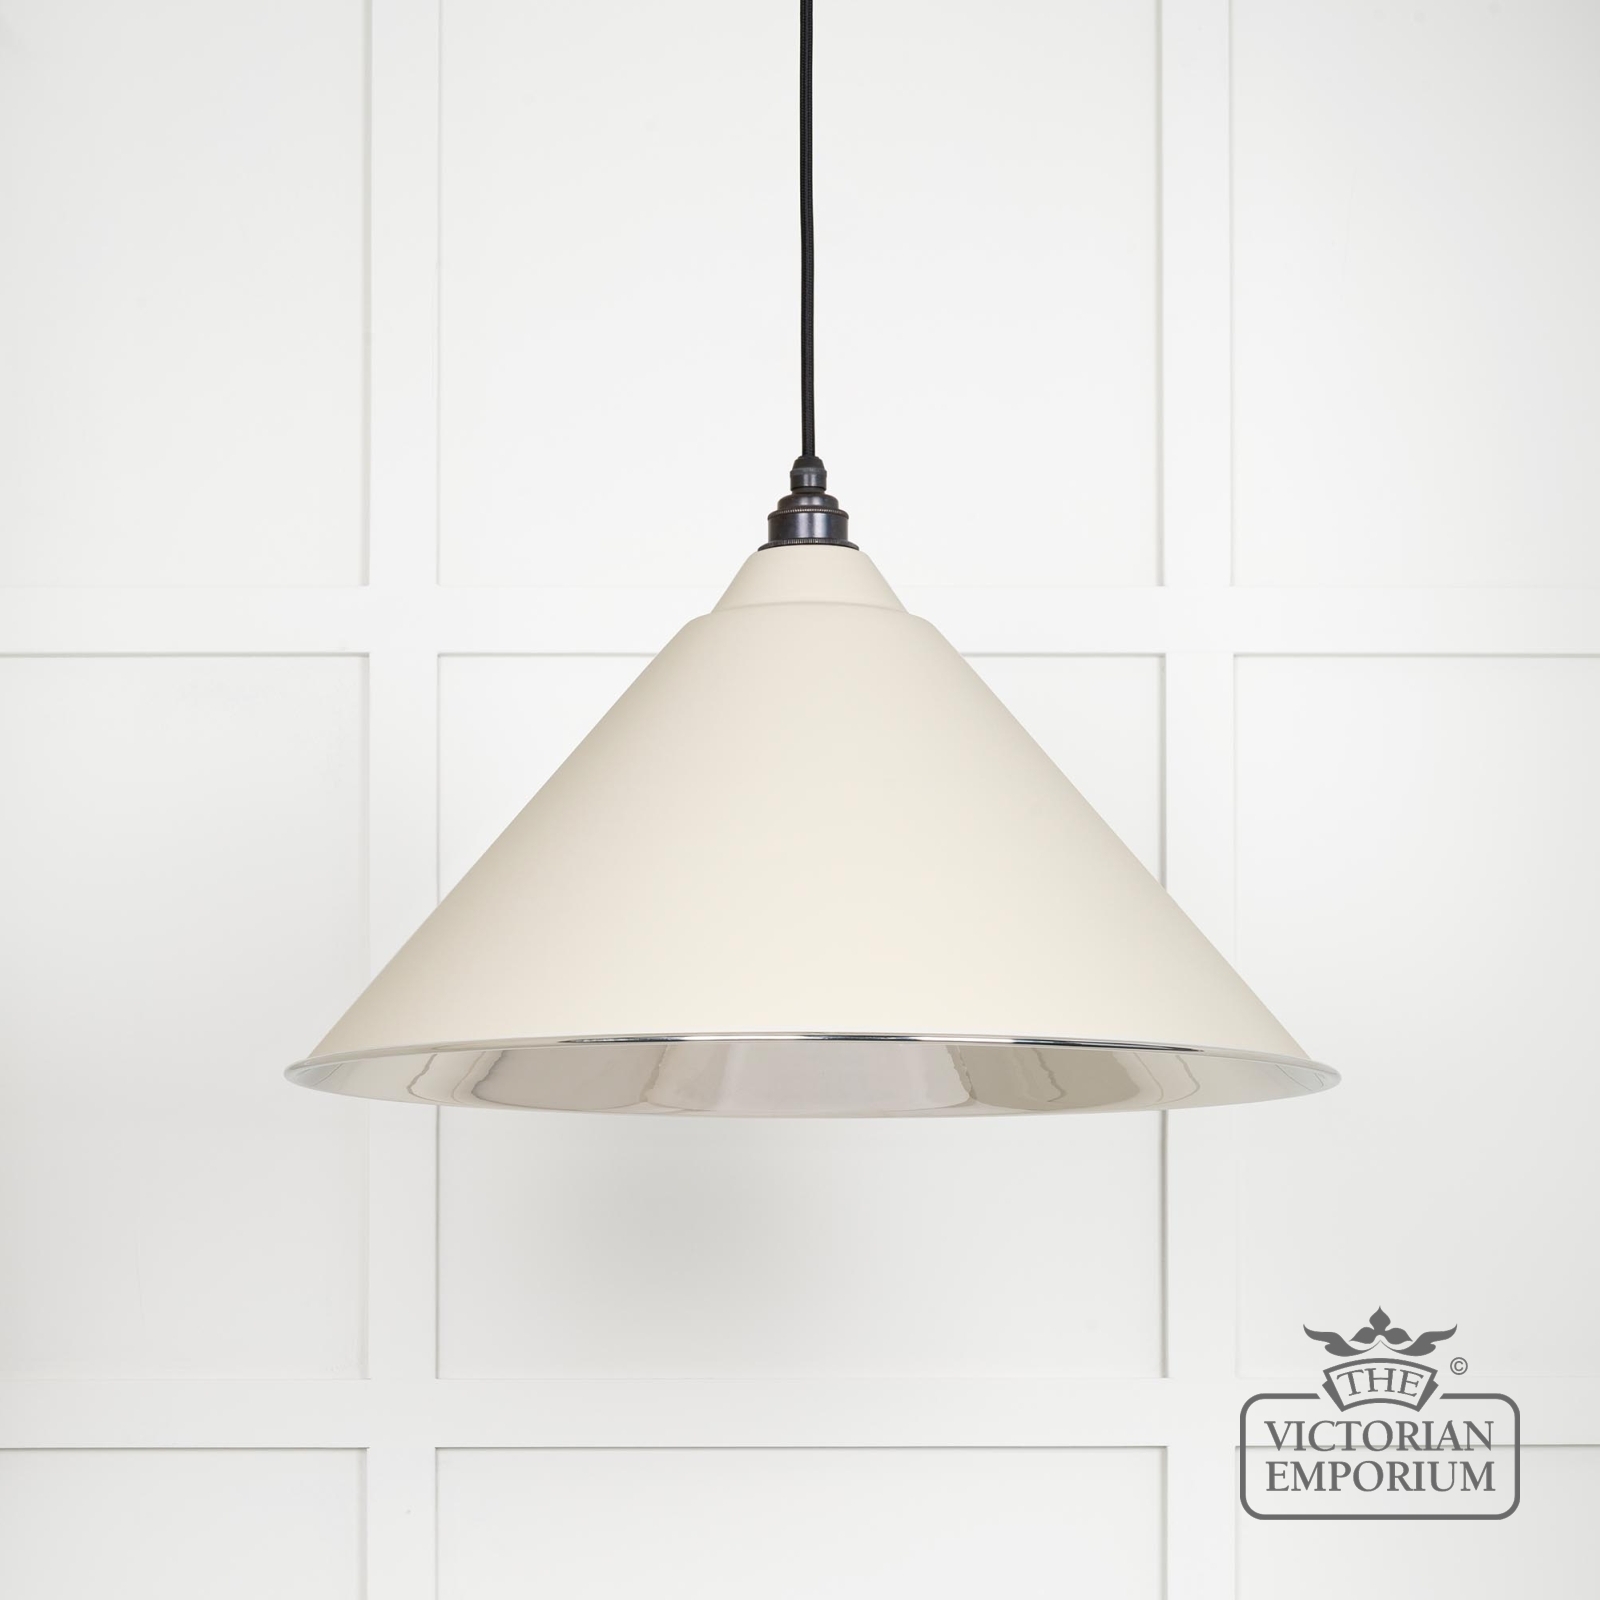 Hockliffe Pendant Light in Smooth Nickel and Teasel Exterior